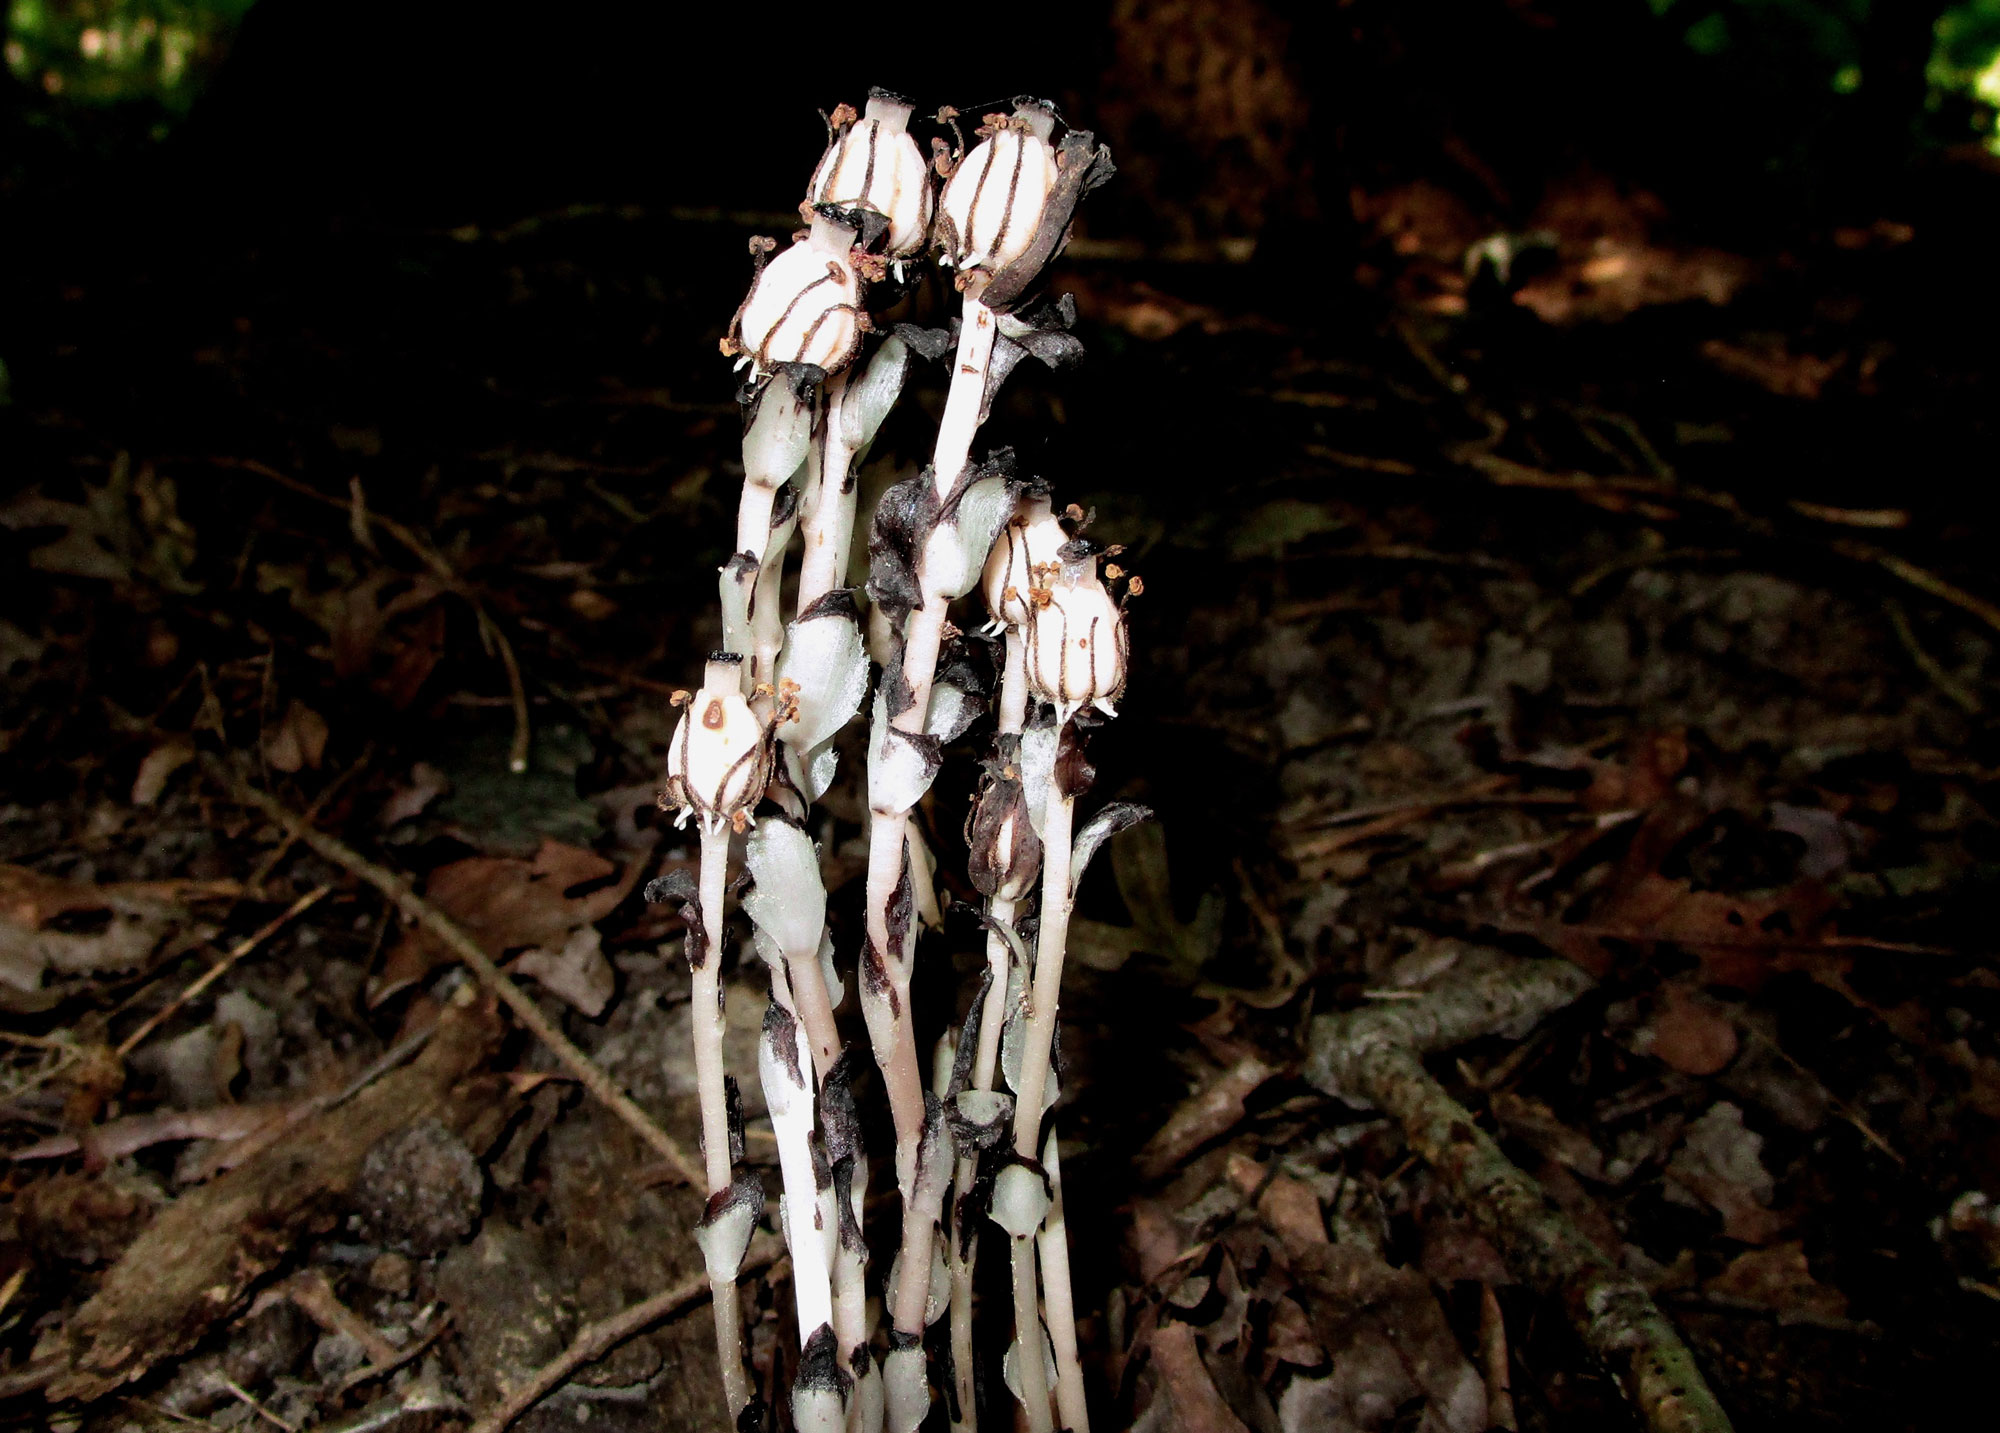 Ghost pipe growing on the forest floor.